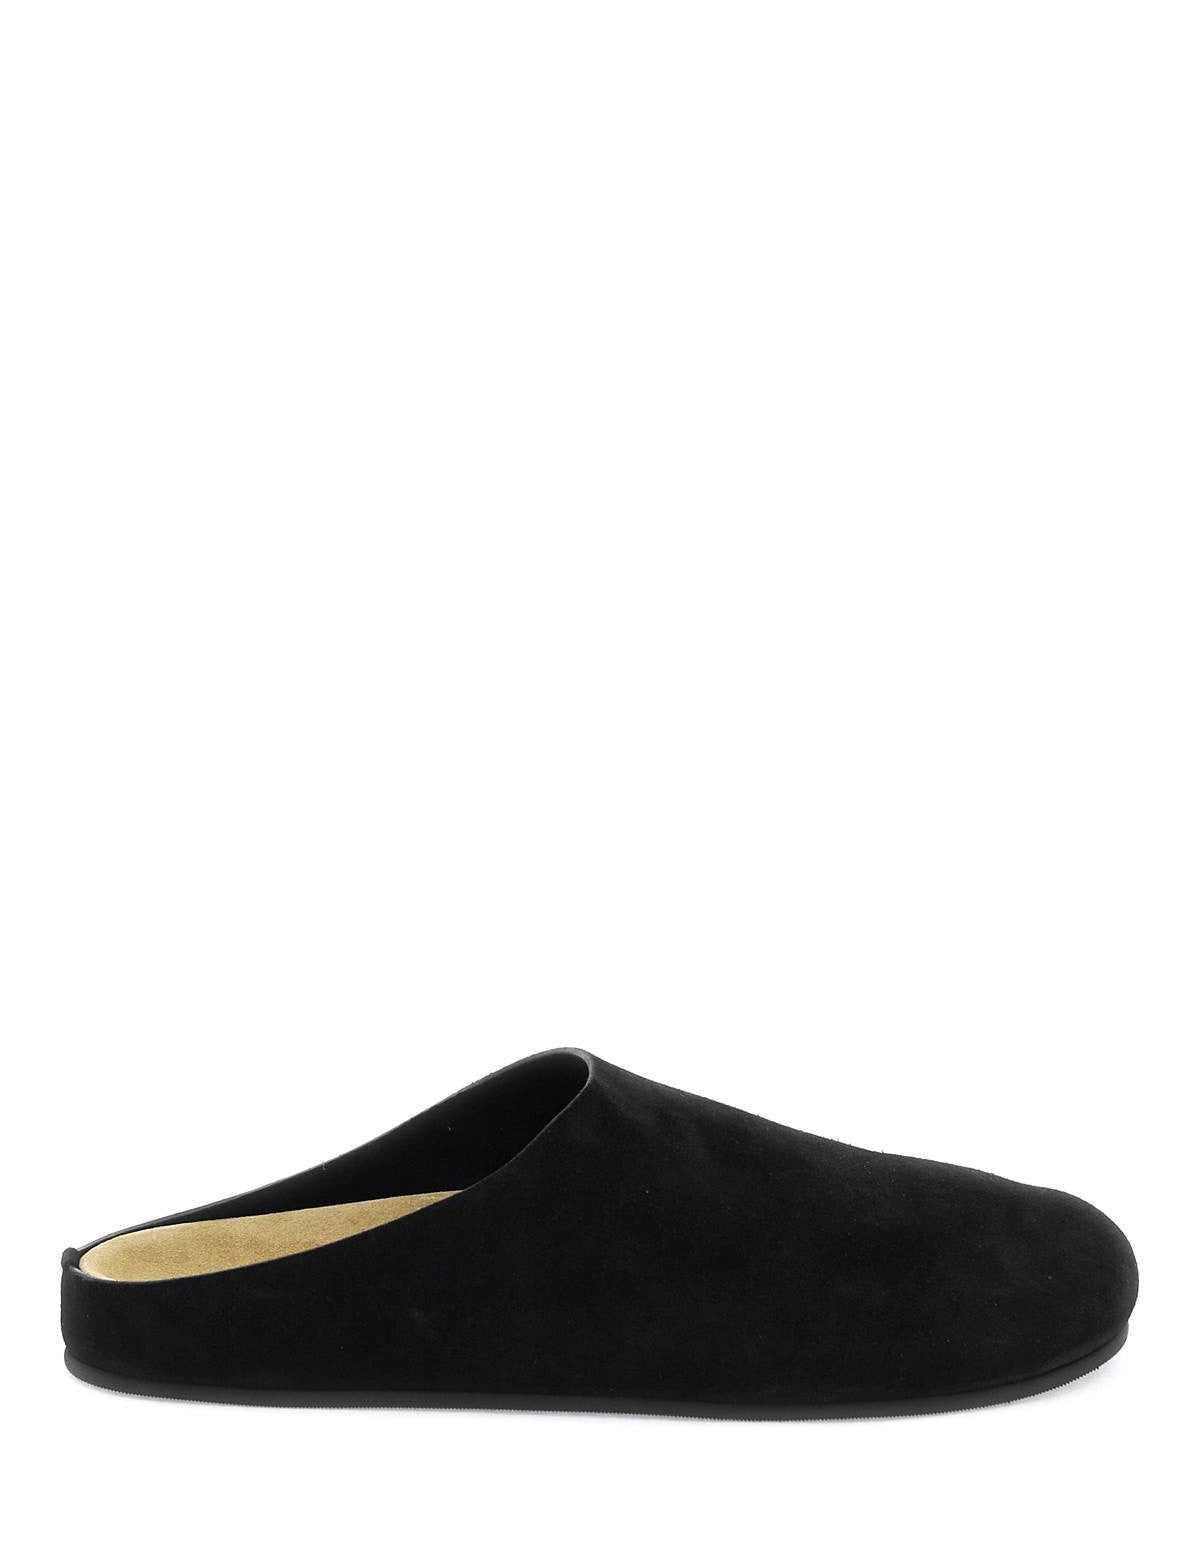 the-row-hugo-suede-leather-clog-in.jpg